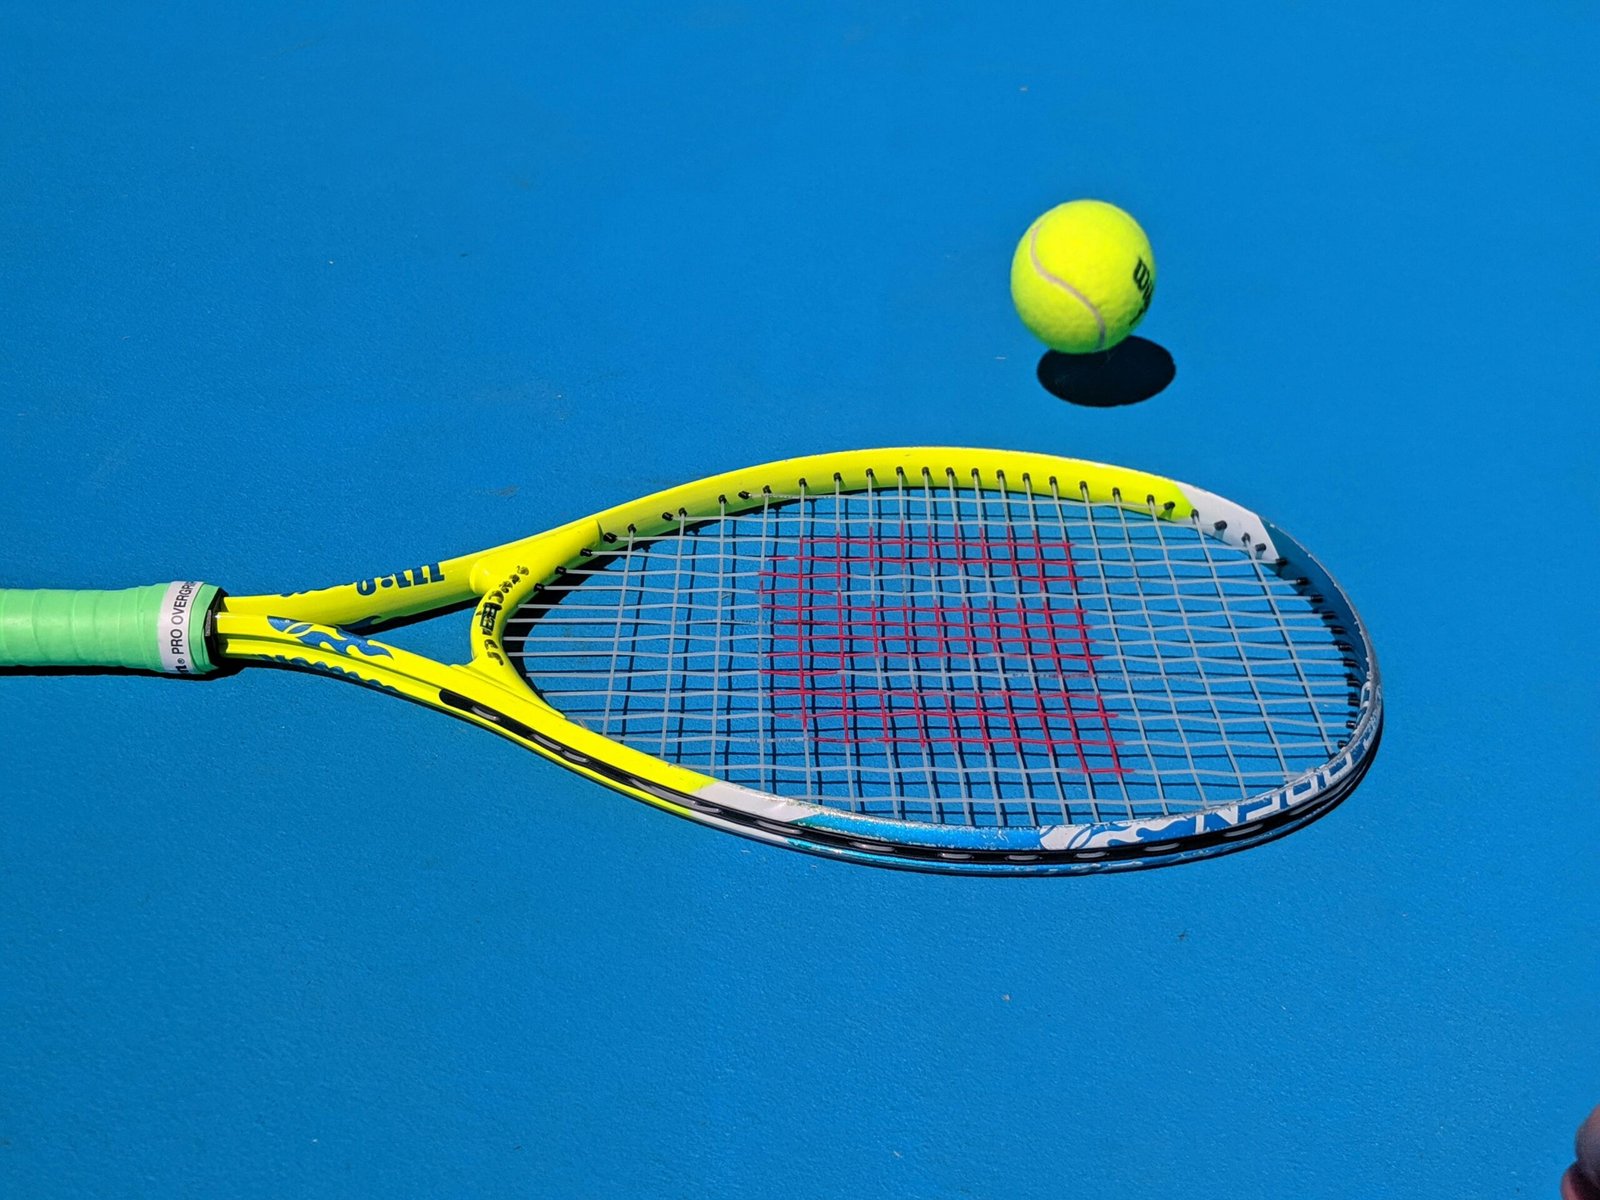 discover the latest updates, news, and insights on tennis, from professional tournaments to tips for beginners, all in one place.